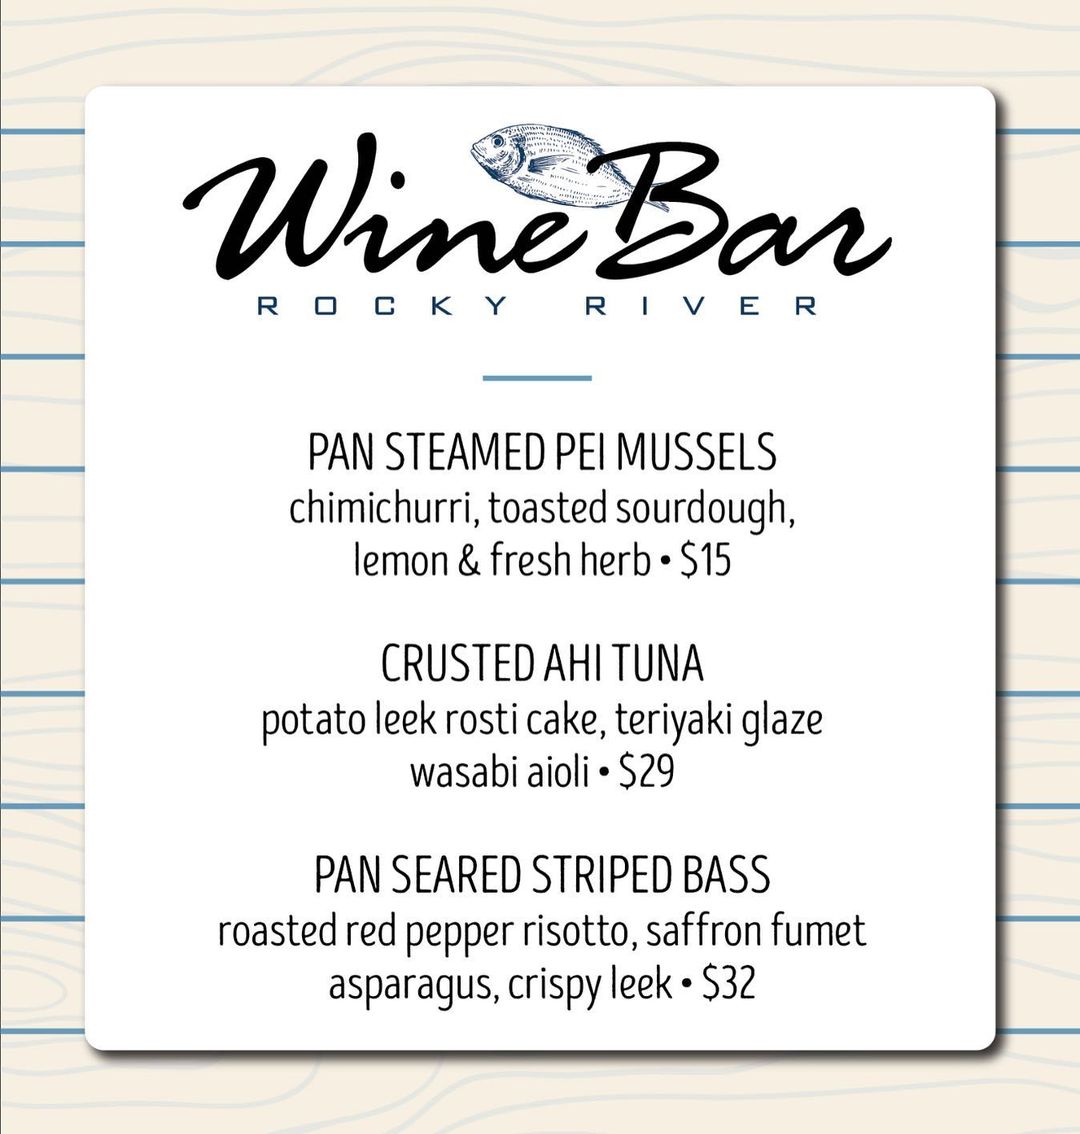 Seafood Specials at Wine Bar